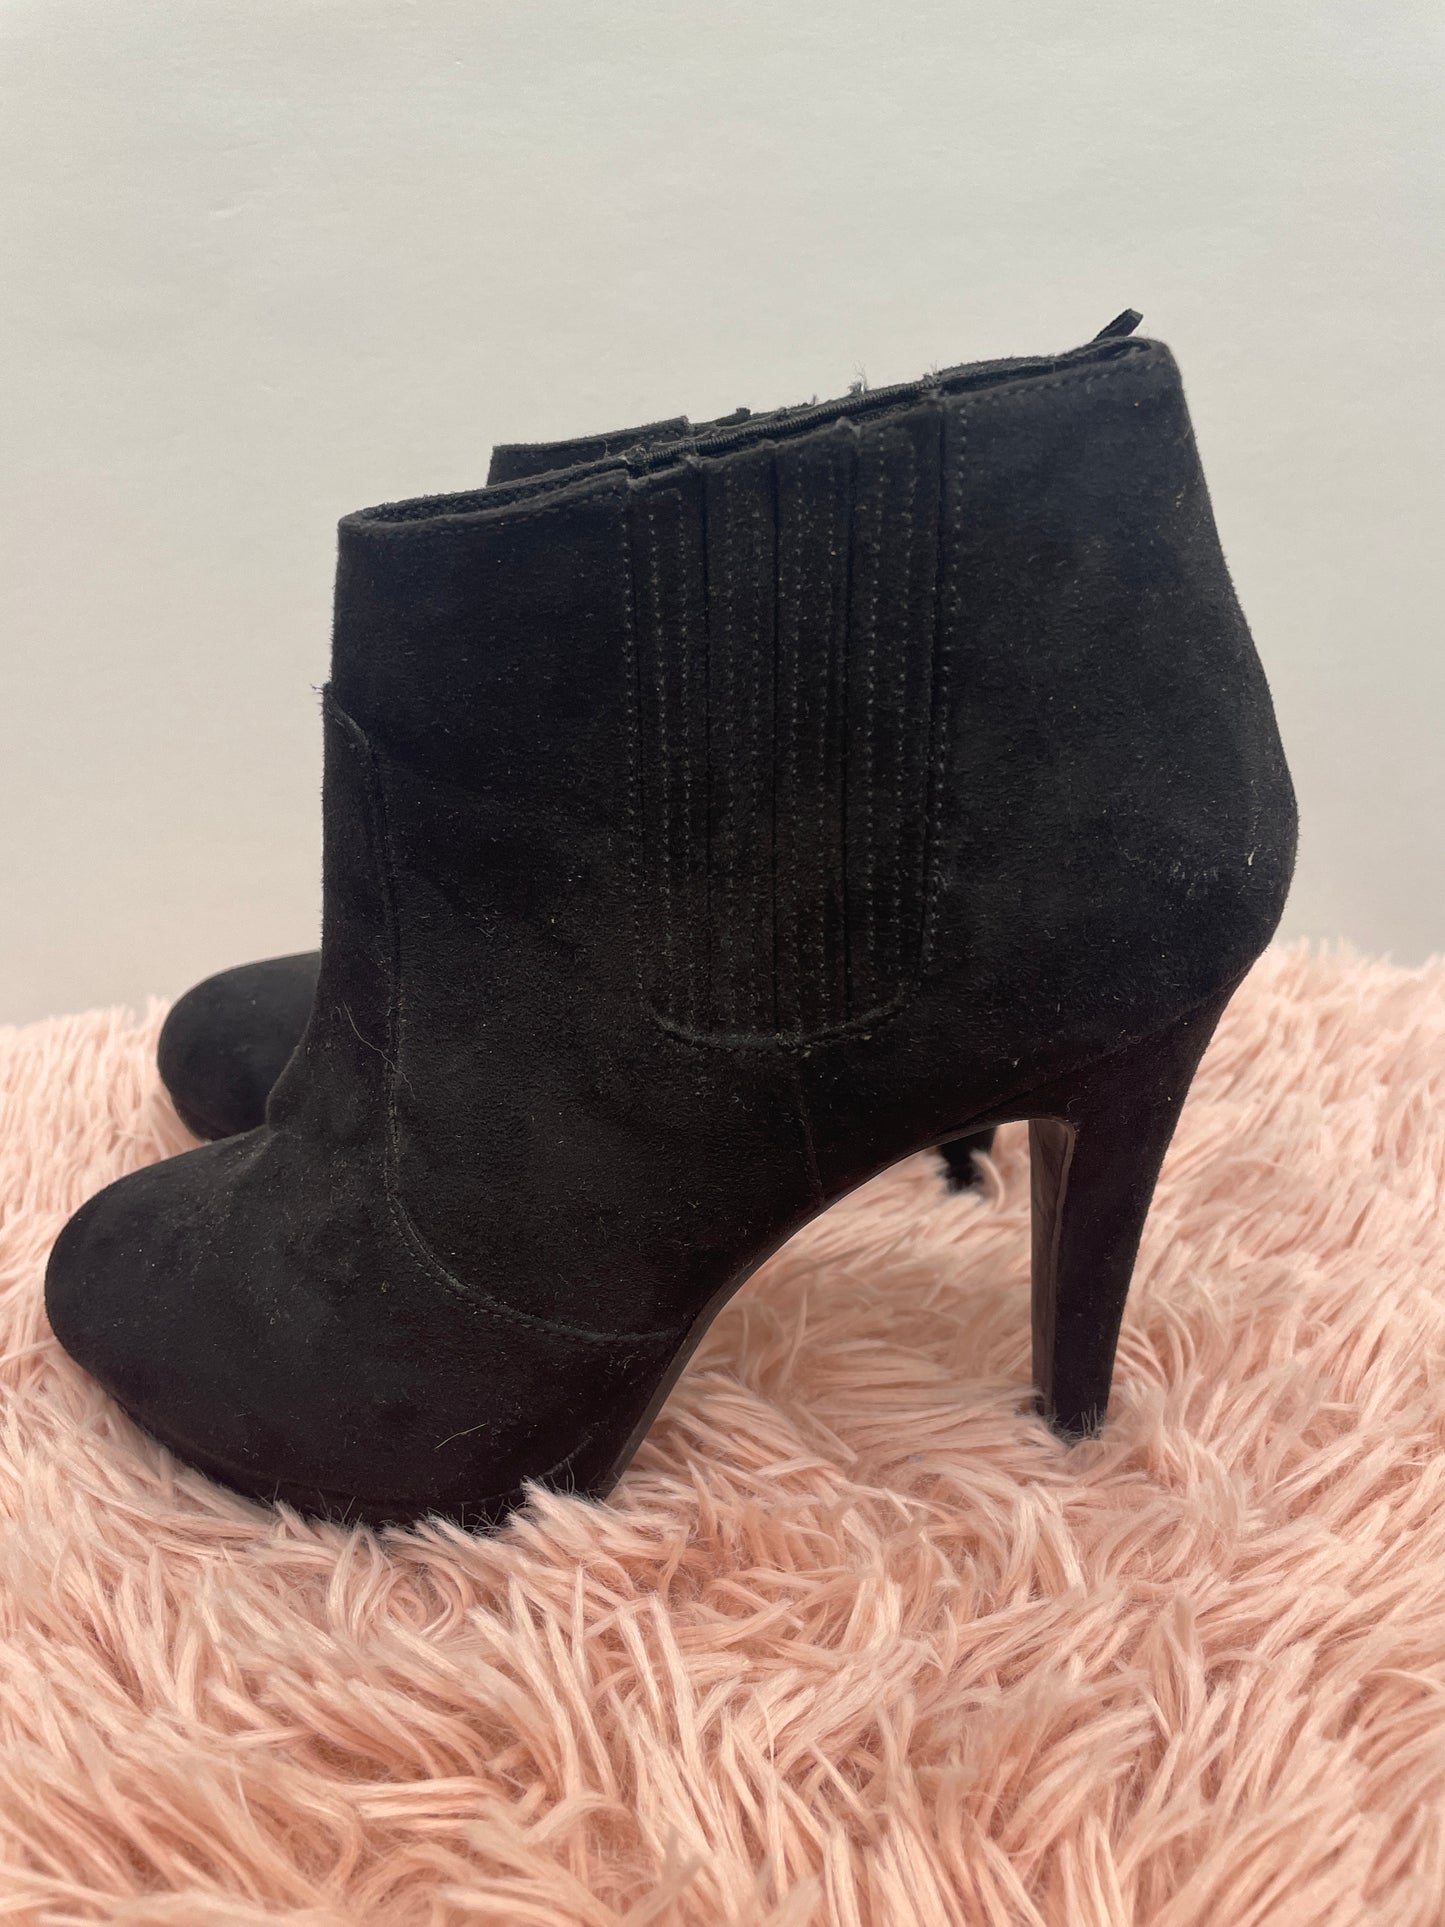 Boots Ankle Heels By H&m  Size: 6.5